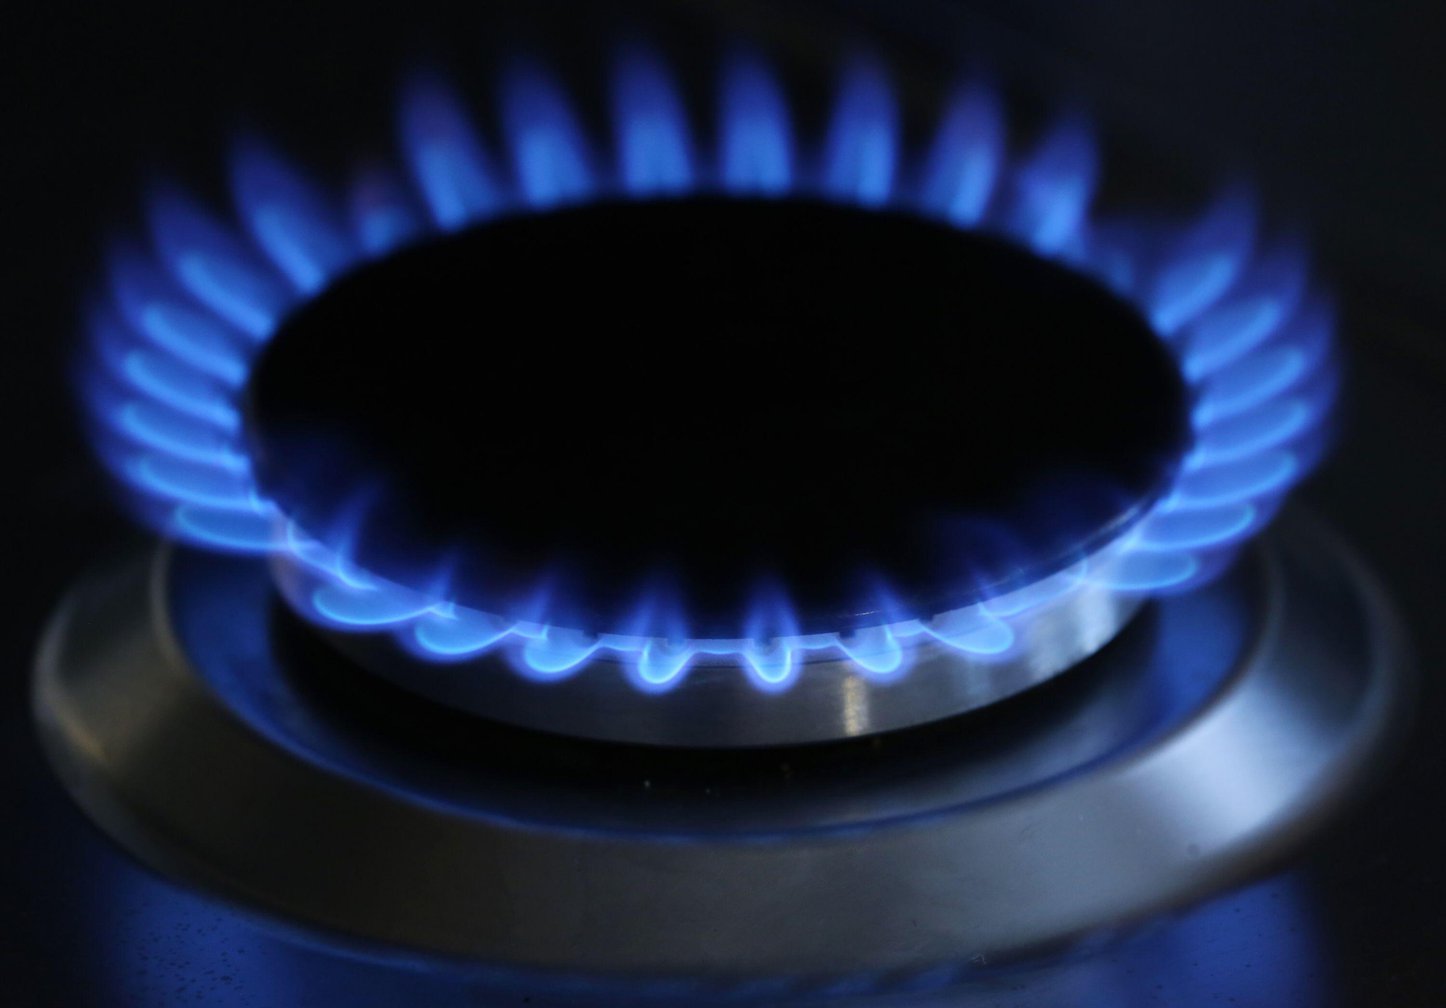 Gas cooker | PA Images / Alamy Stock Photo